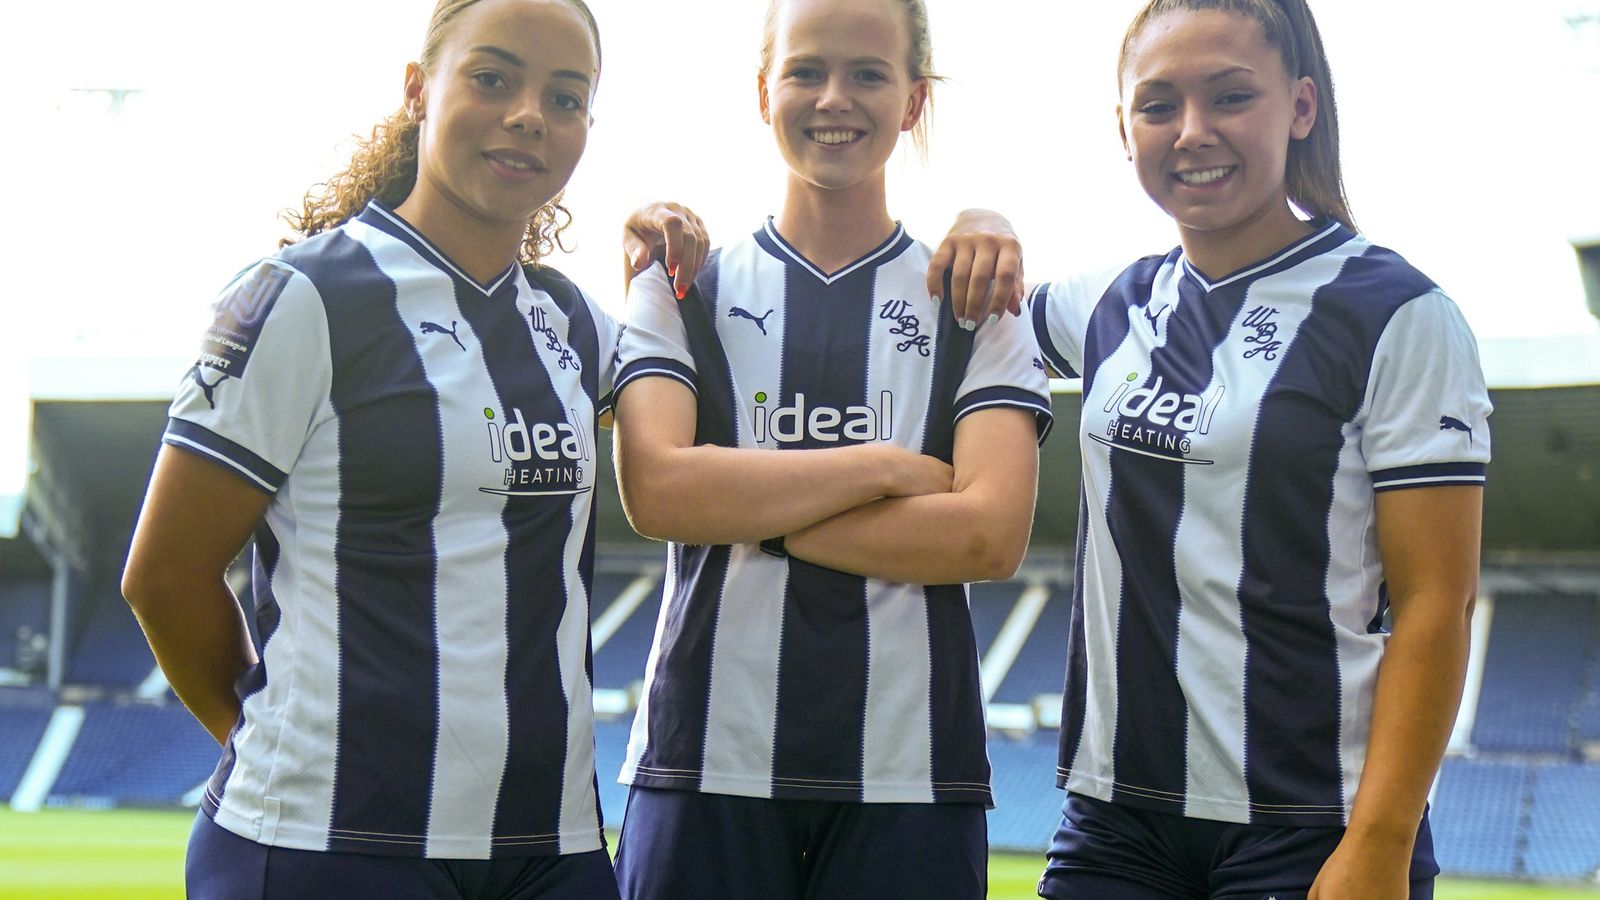 West Brom women's team switch from white shorts to navy to 'focus on performance without added anxiety' of periods